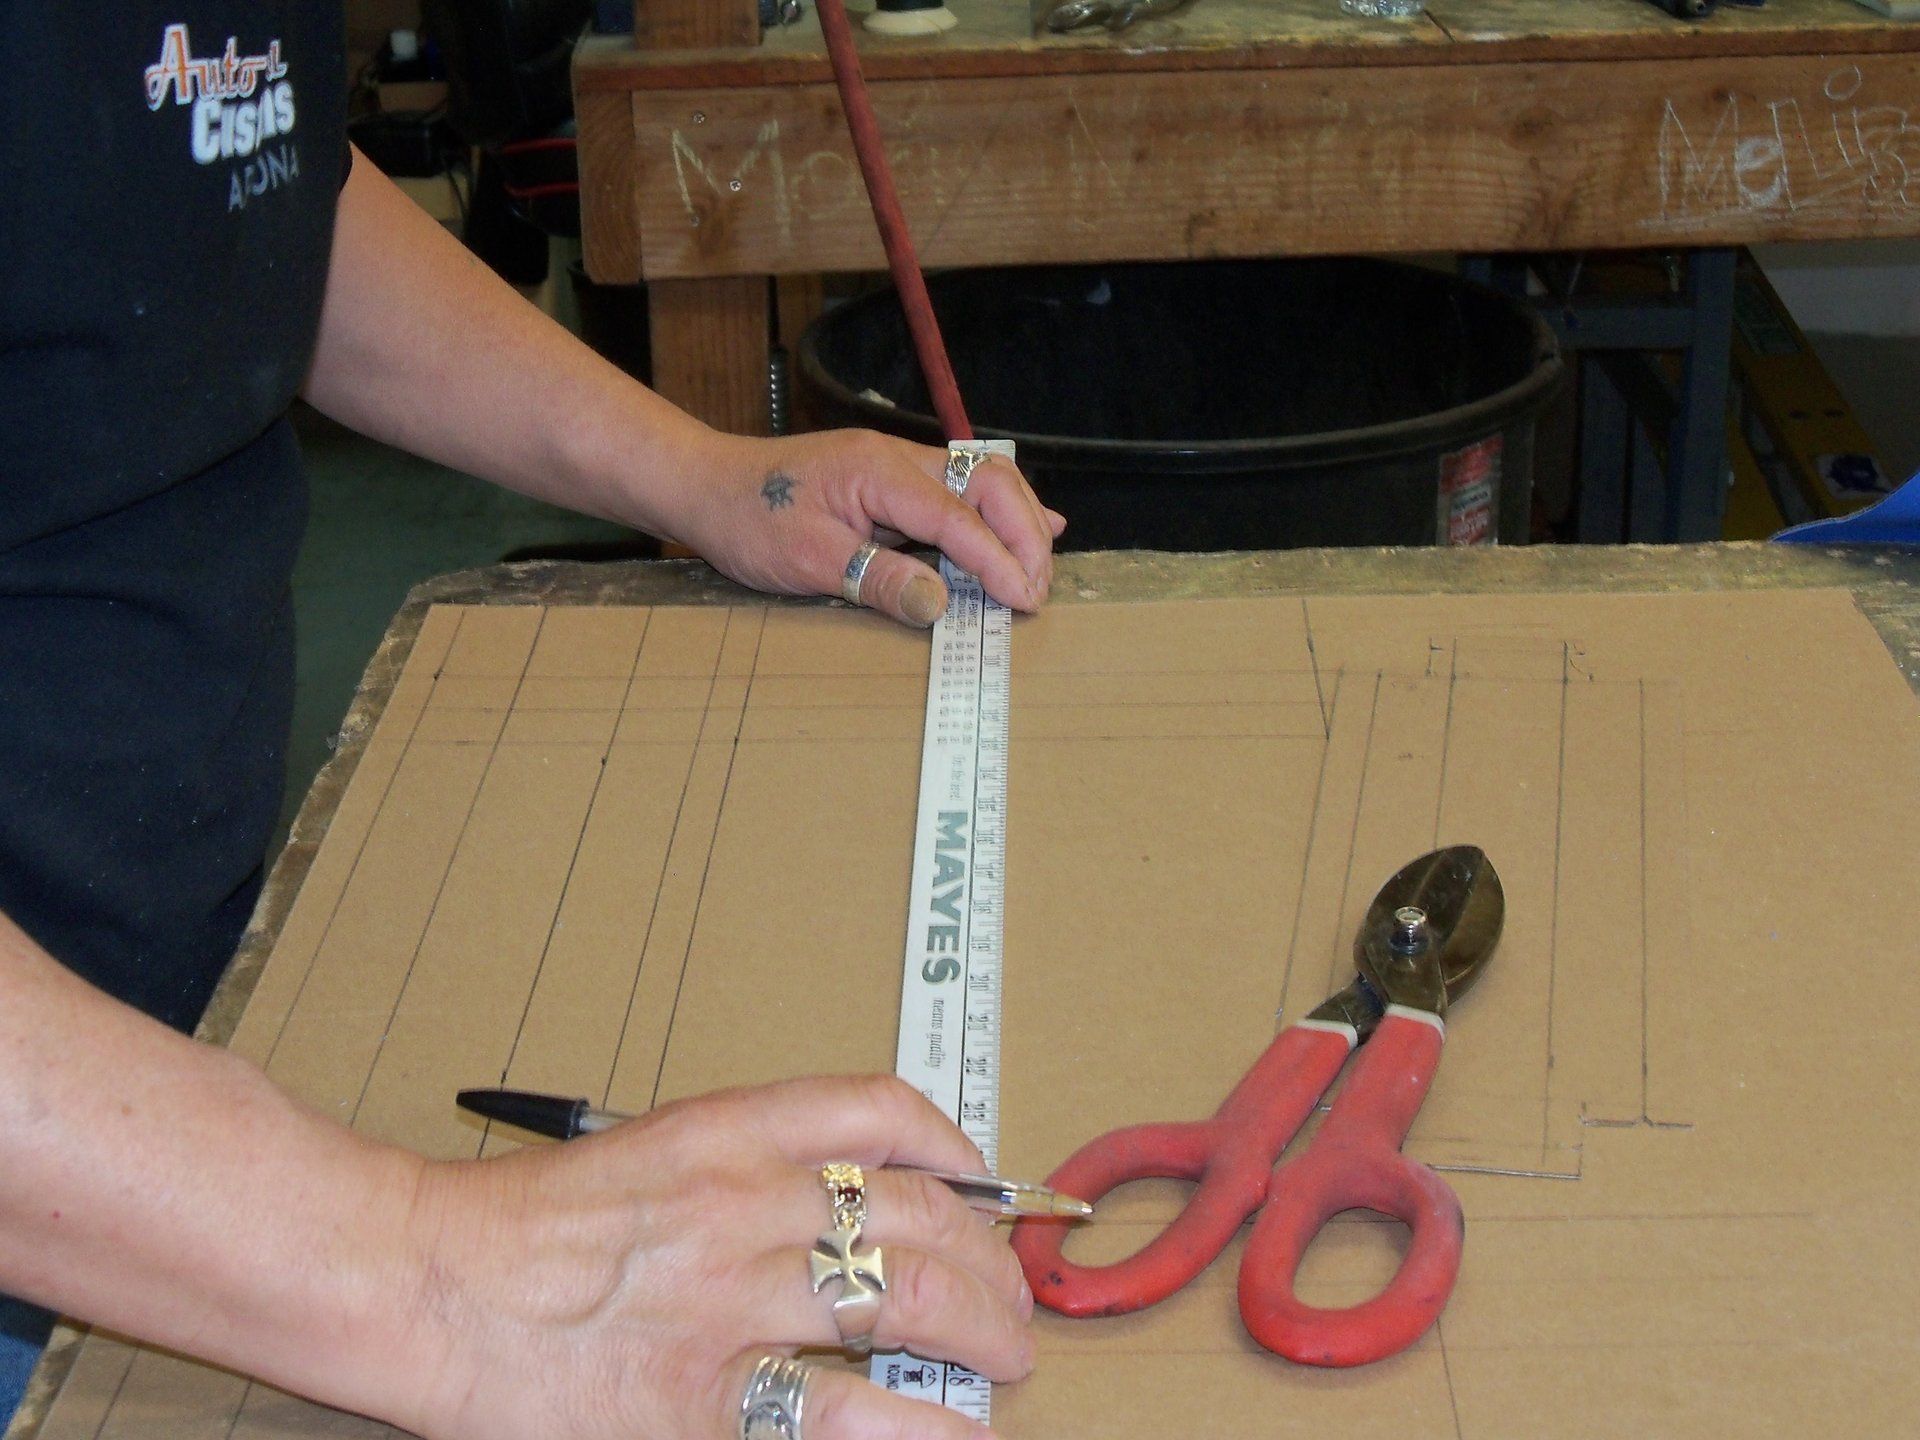 Man measuring with card board